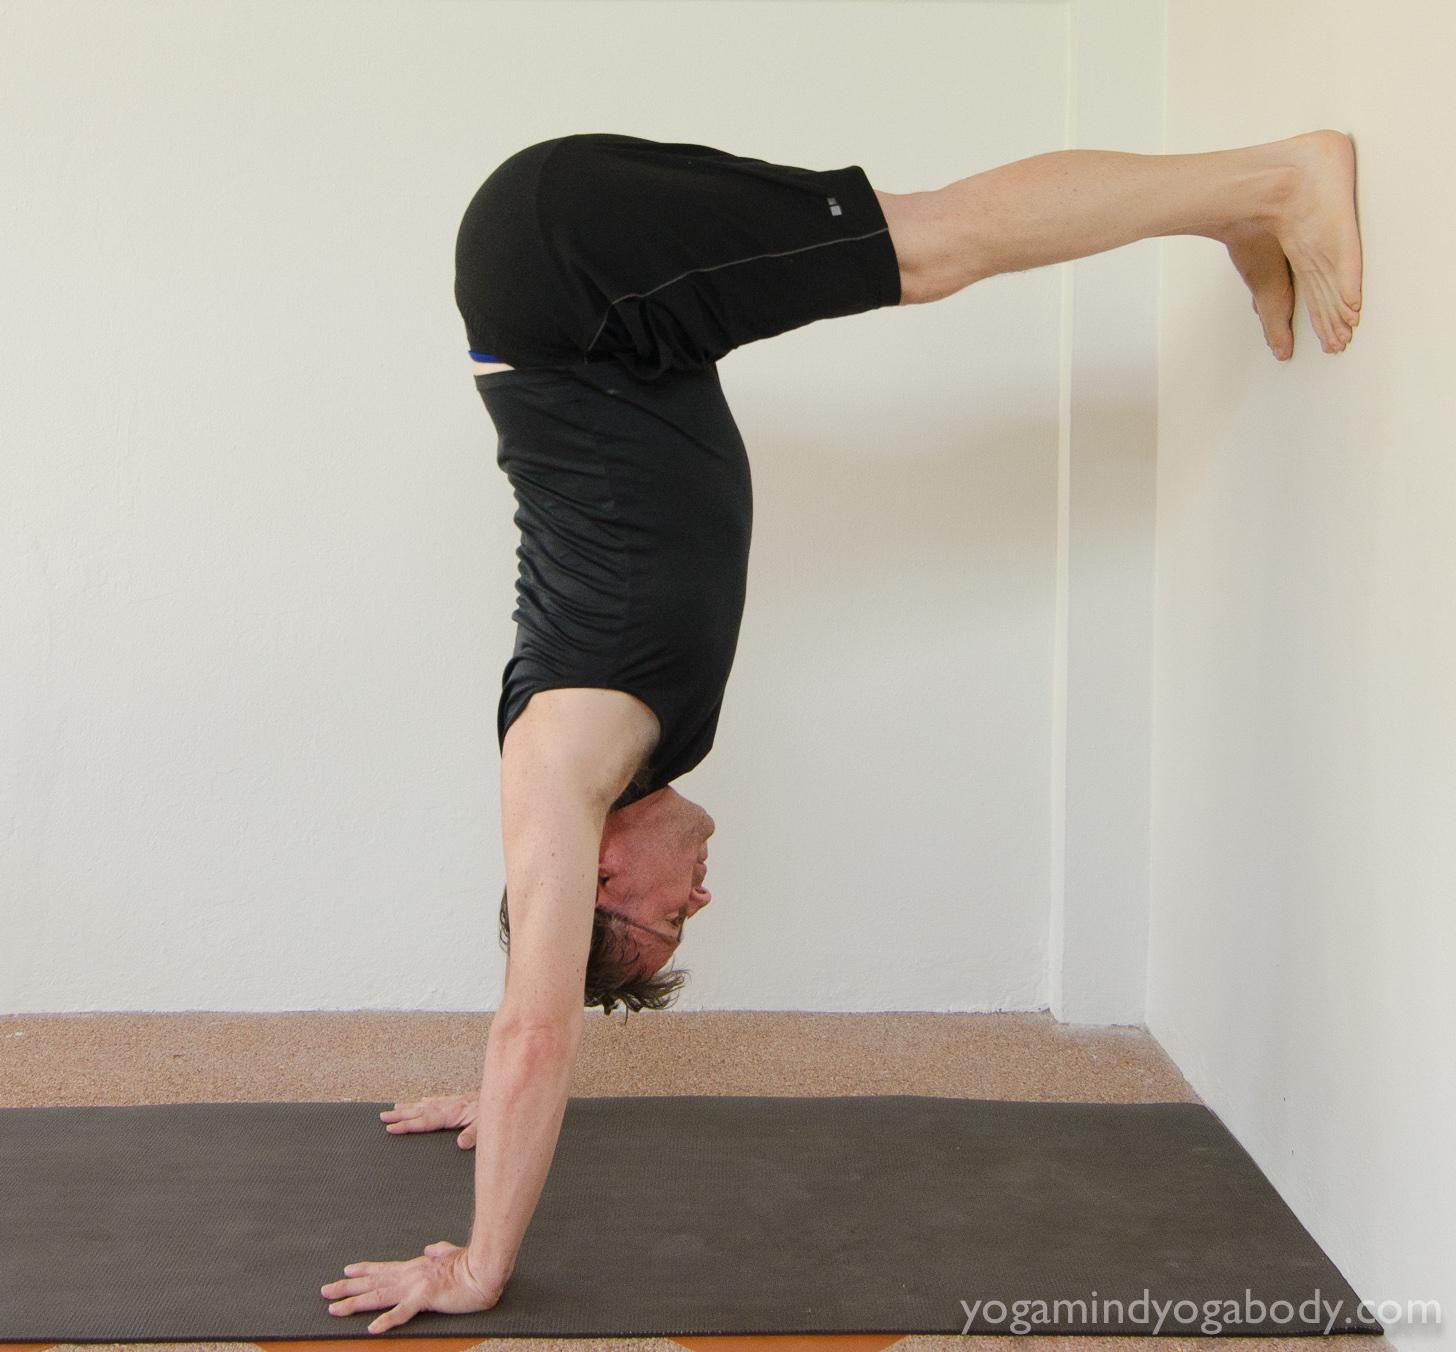 Stepping into Courage with Inversions - Yoga Mind Yoga Body